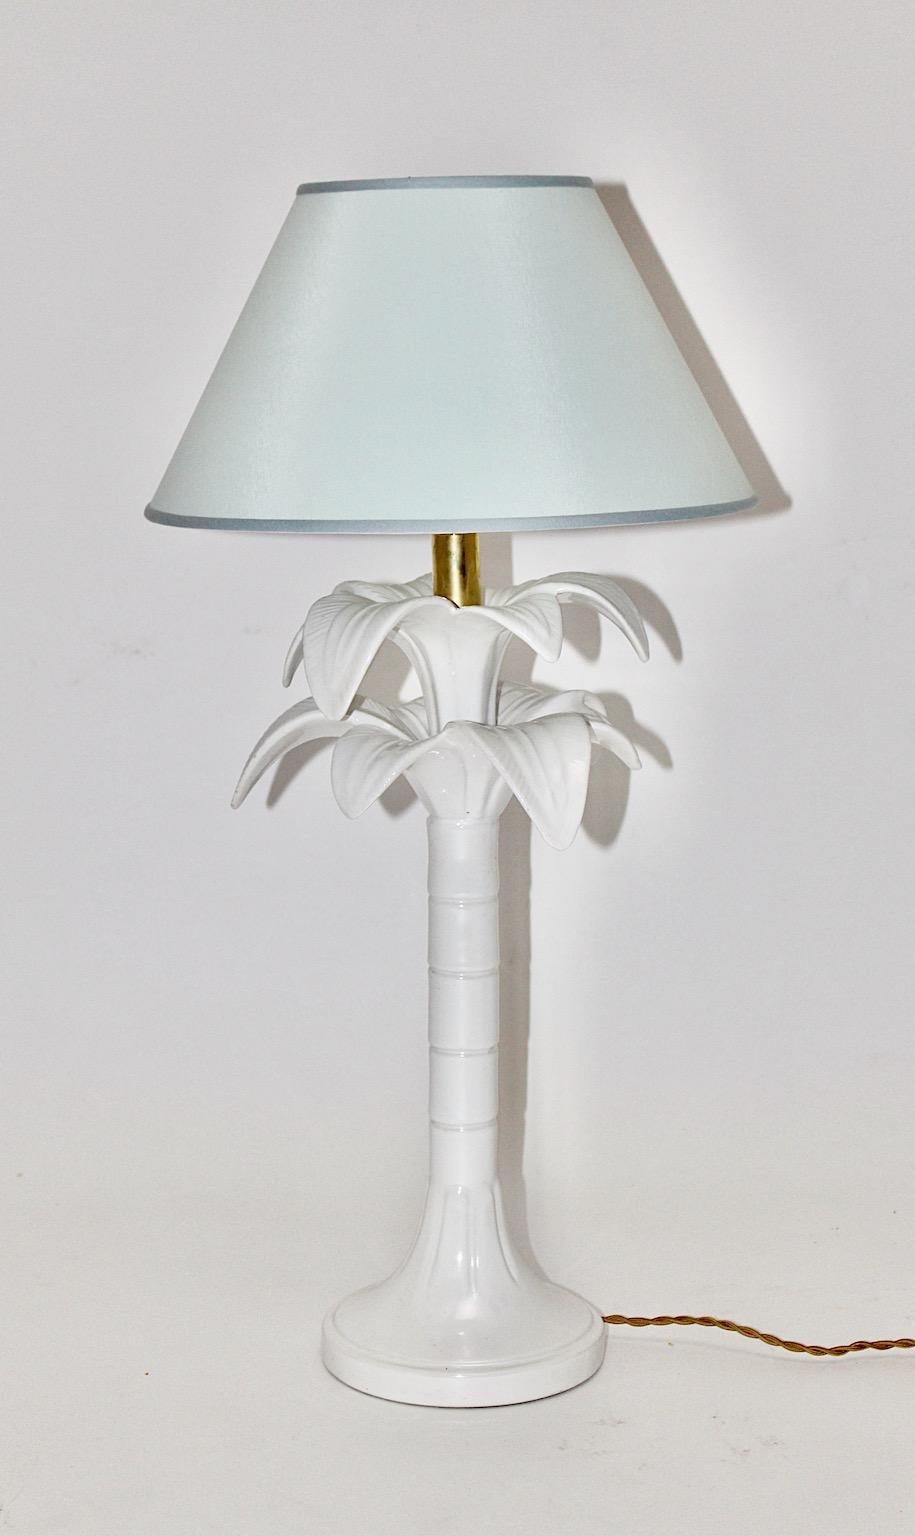 Palm Tree vintage table lamp by Tommaso Barbi from white glazed ceramic, brass and bakelite in the color tones white and gold 1970s Italy.
An elegant table lamp with Hollywood Regency style vibe and feel in wonderful white and pastel blue color by